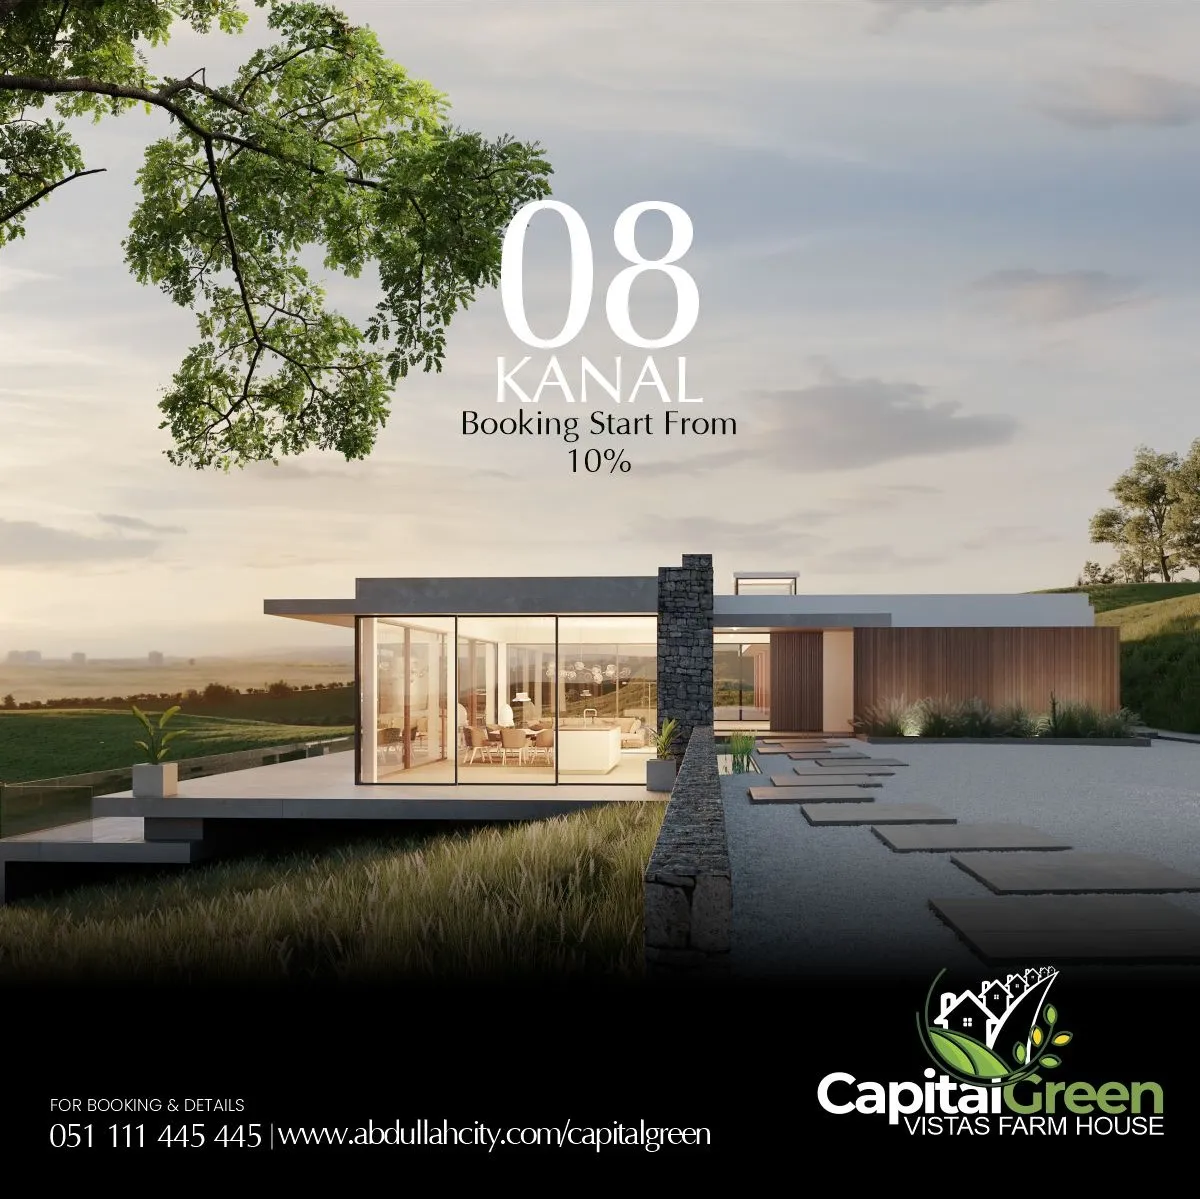 Buy Capital Green Vistas Farmhouse to enjoy the Scenic beauty and Wide Landscapes of the Iconic Margalla Hills between twin cities of Rawalpindi and Islamabad